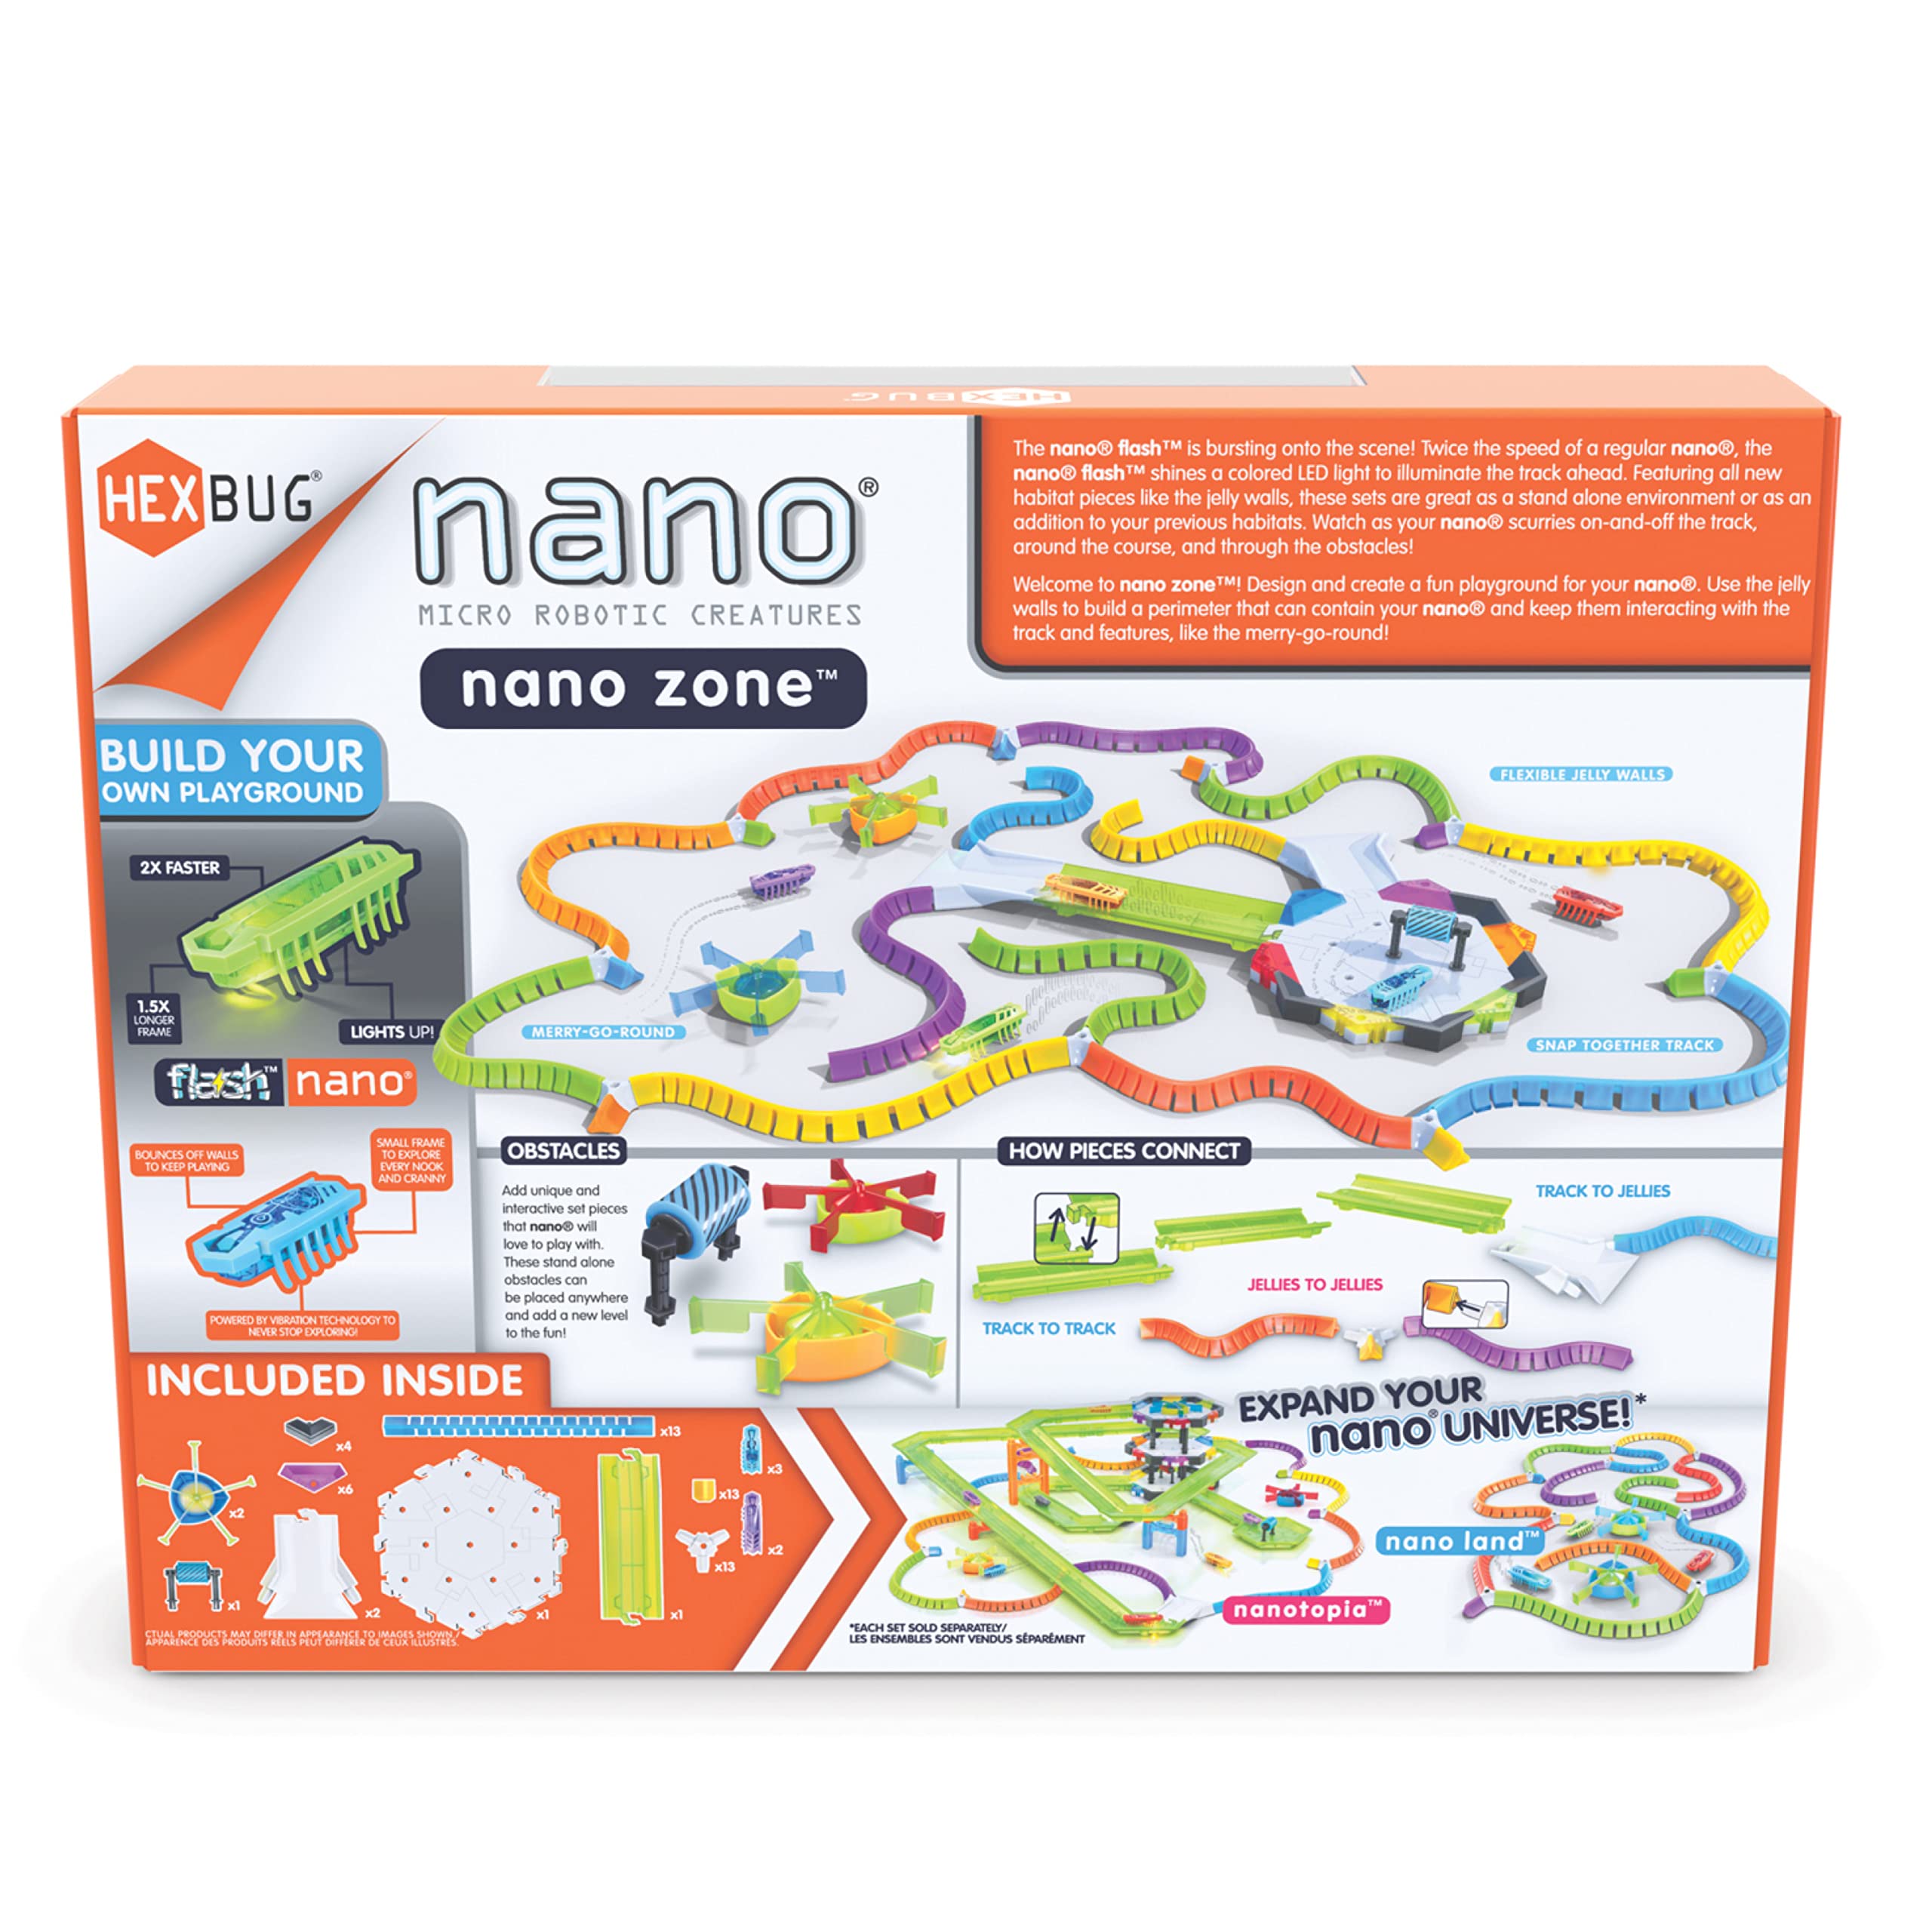 HEXBUG Nano Zone, Sensory Toys for Kids & Cats with Over 60 Pieces & 5 Nano Bugs, STEM Kits & Mini Robot Toy for Kids Ages 3 & Up, Batteries Included